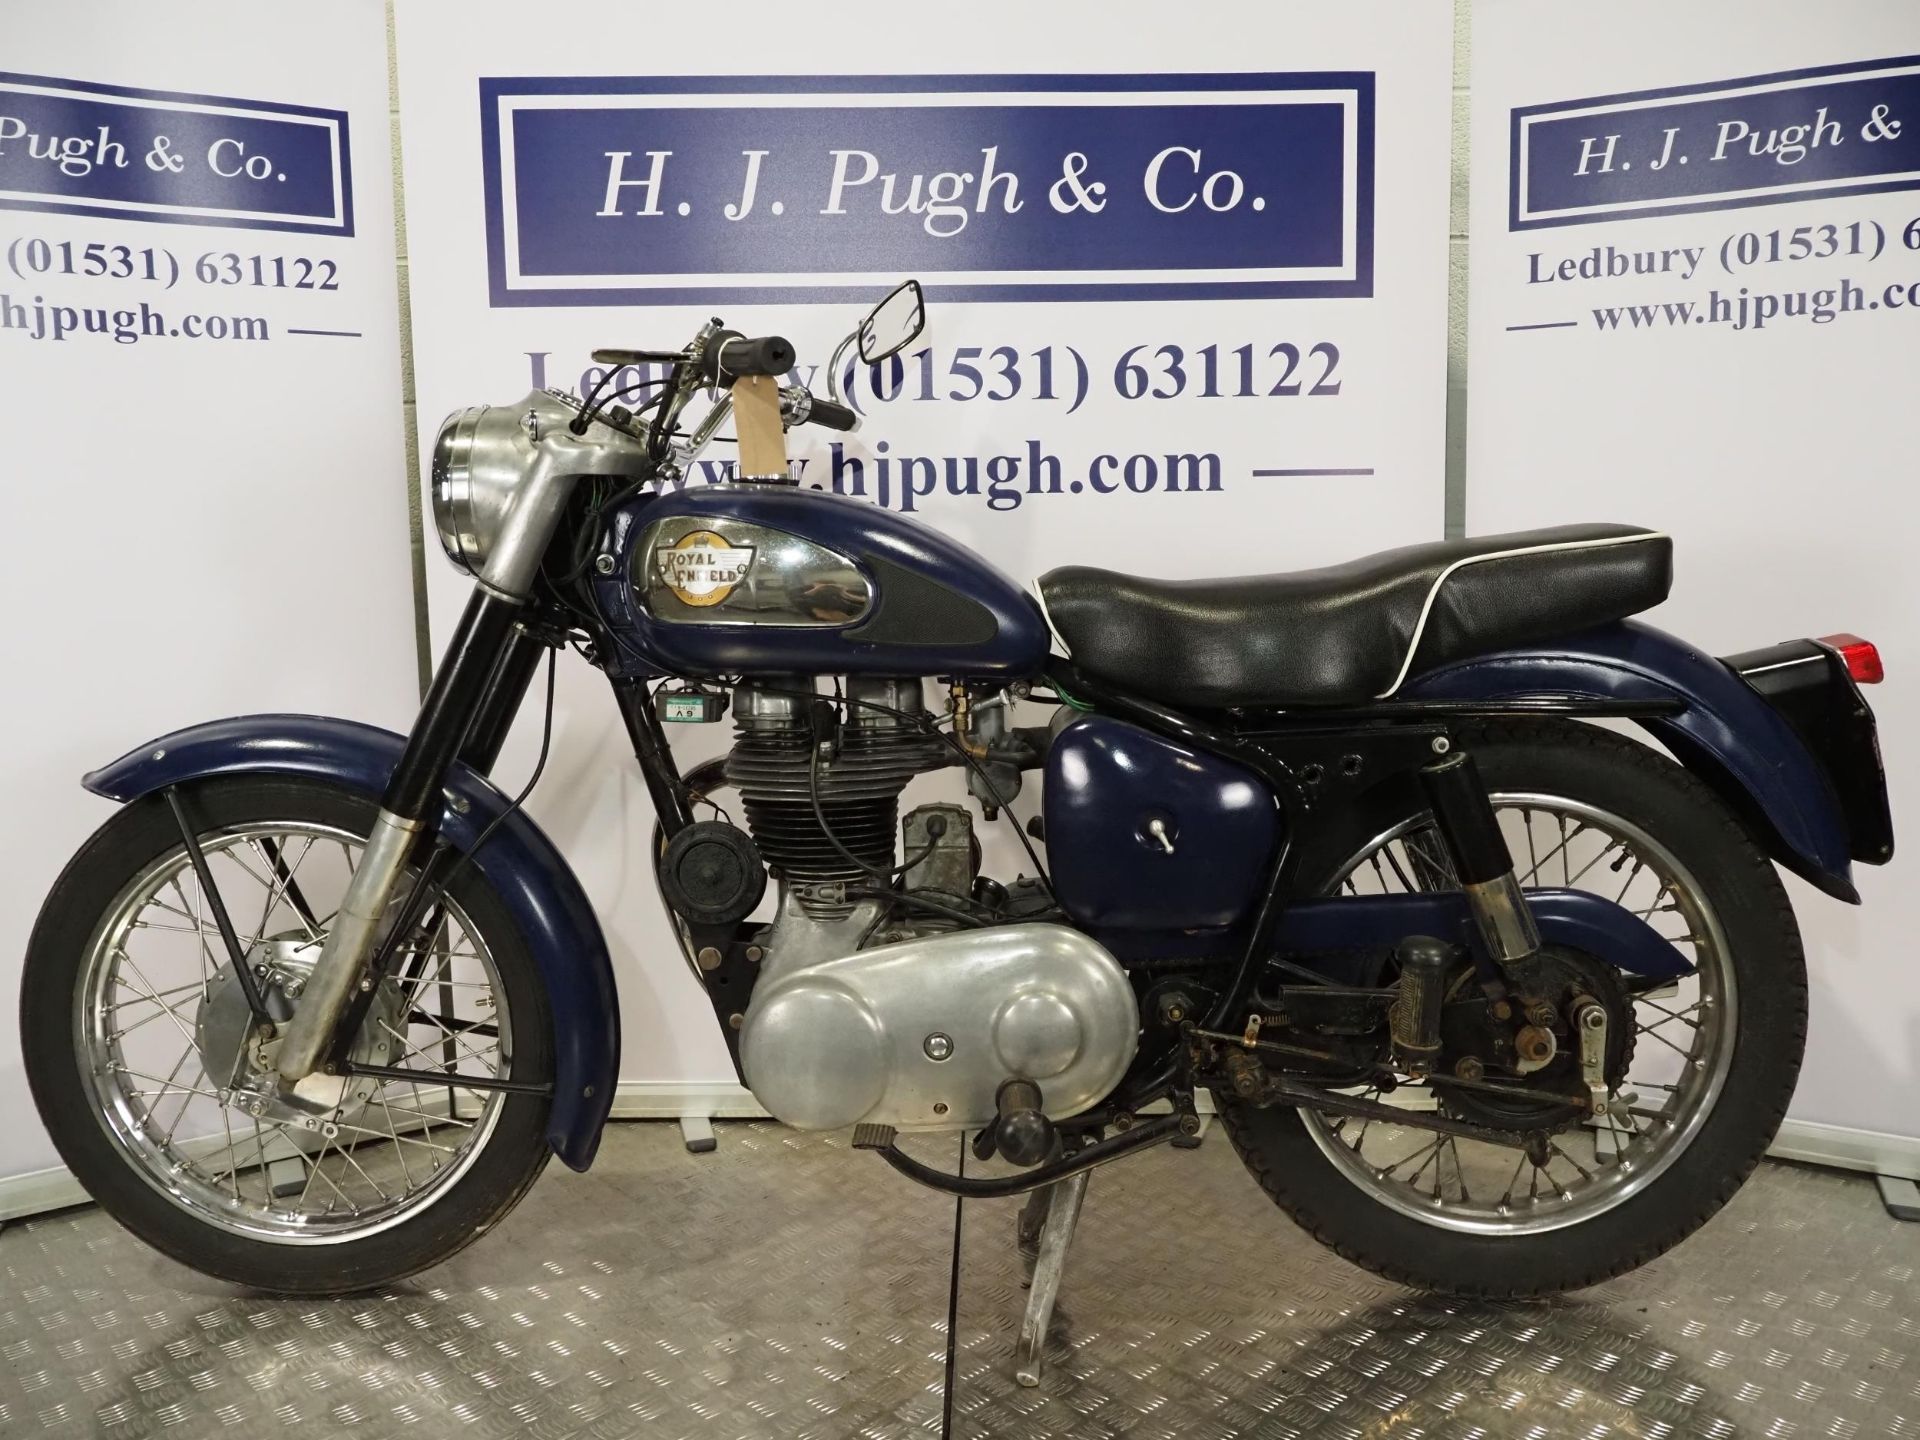 Royal Enfield Bullet motorcycle. 1958. 346cc Frame No. 41907 Engine No. 17364 Part of a deceased - Image 6 of 7